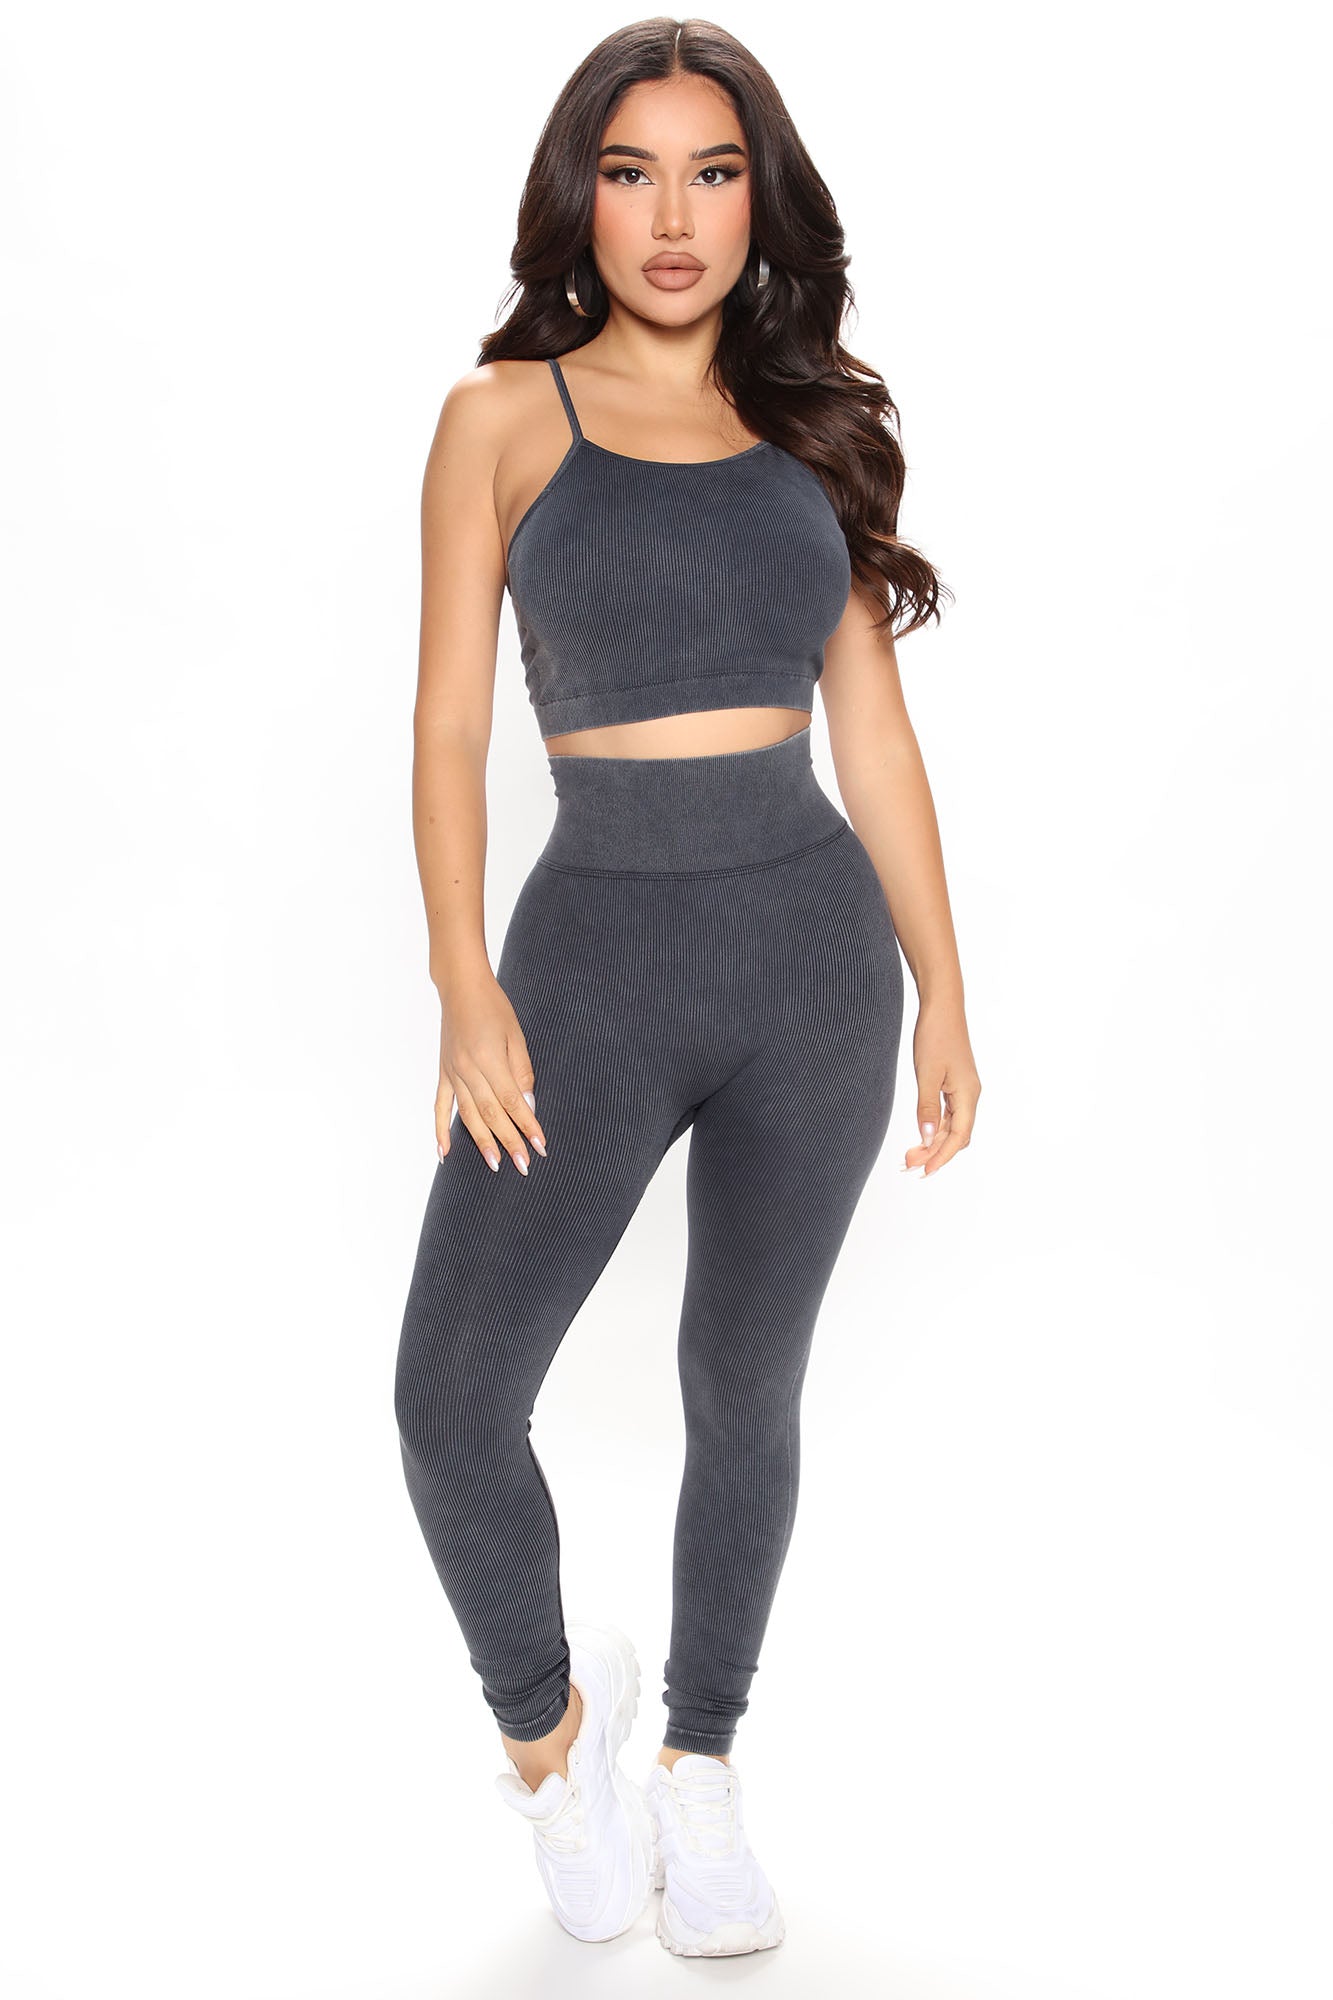 Going Out All Night Legging Set - Black